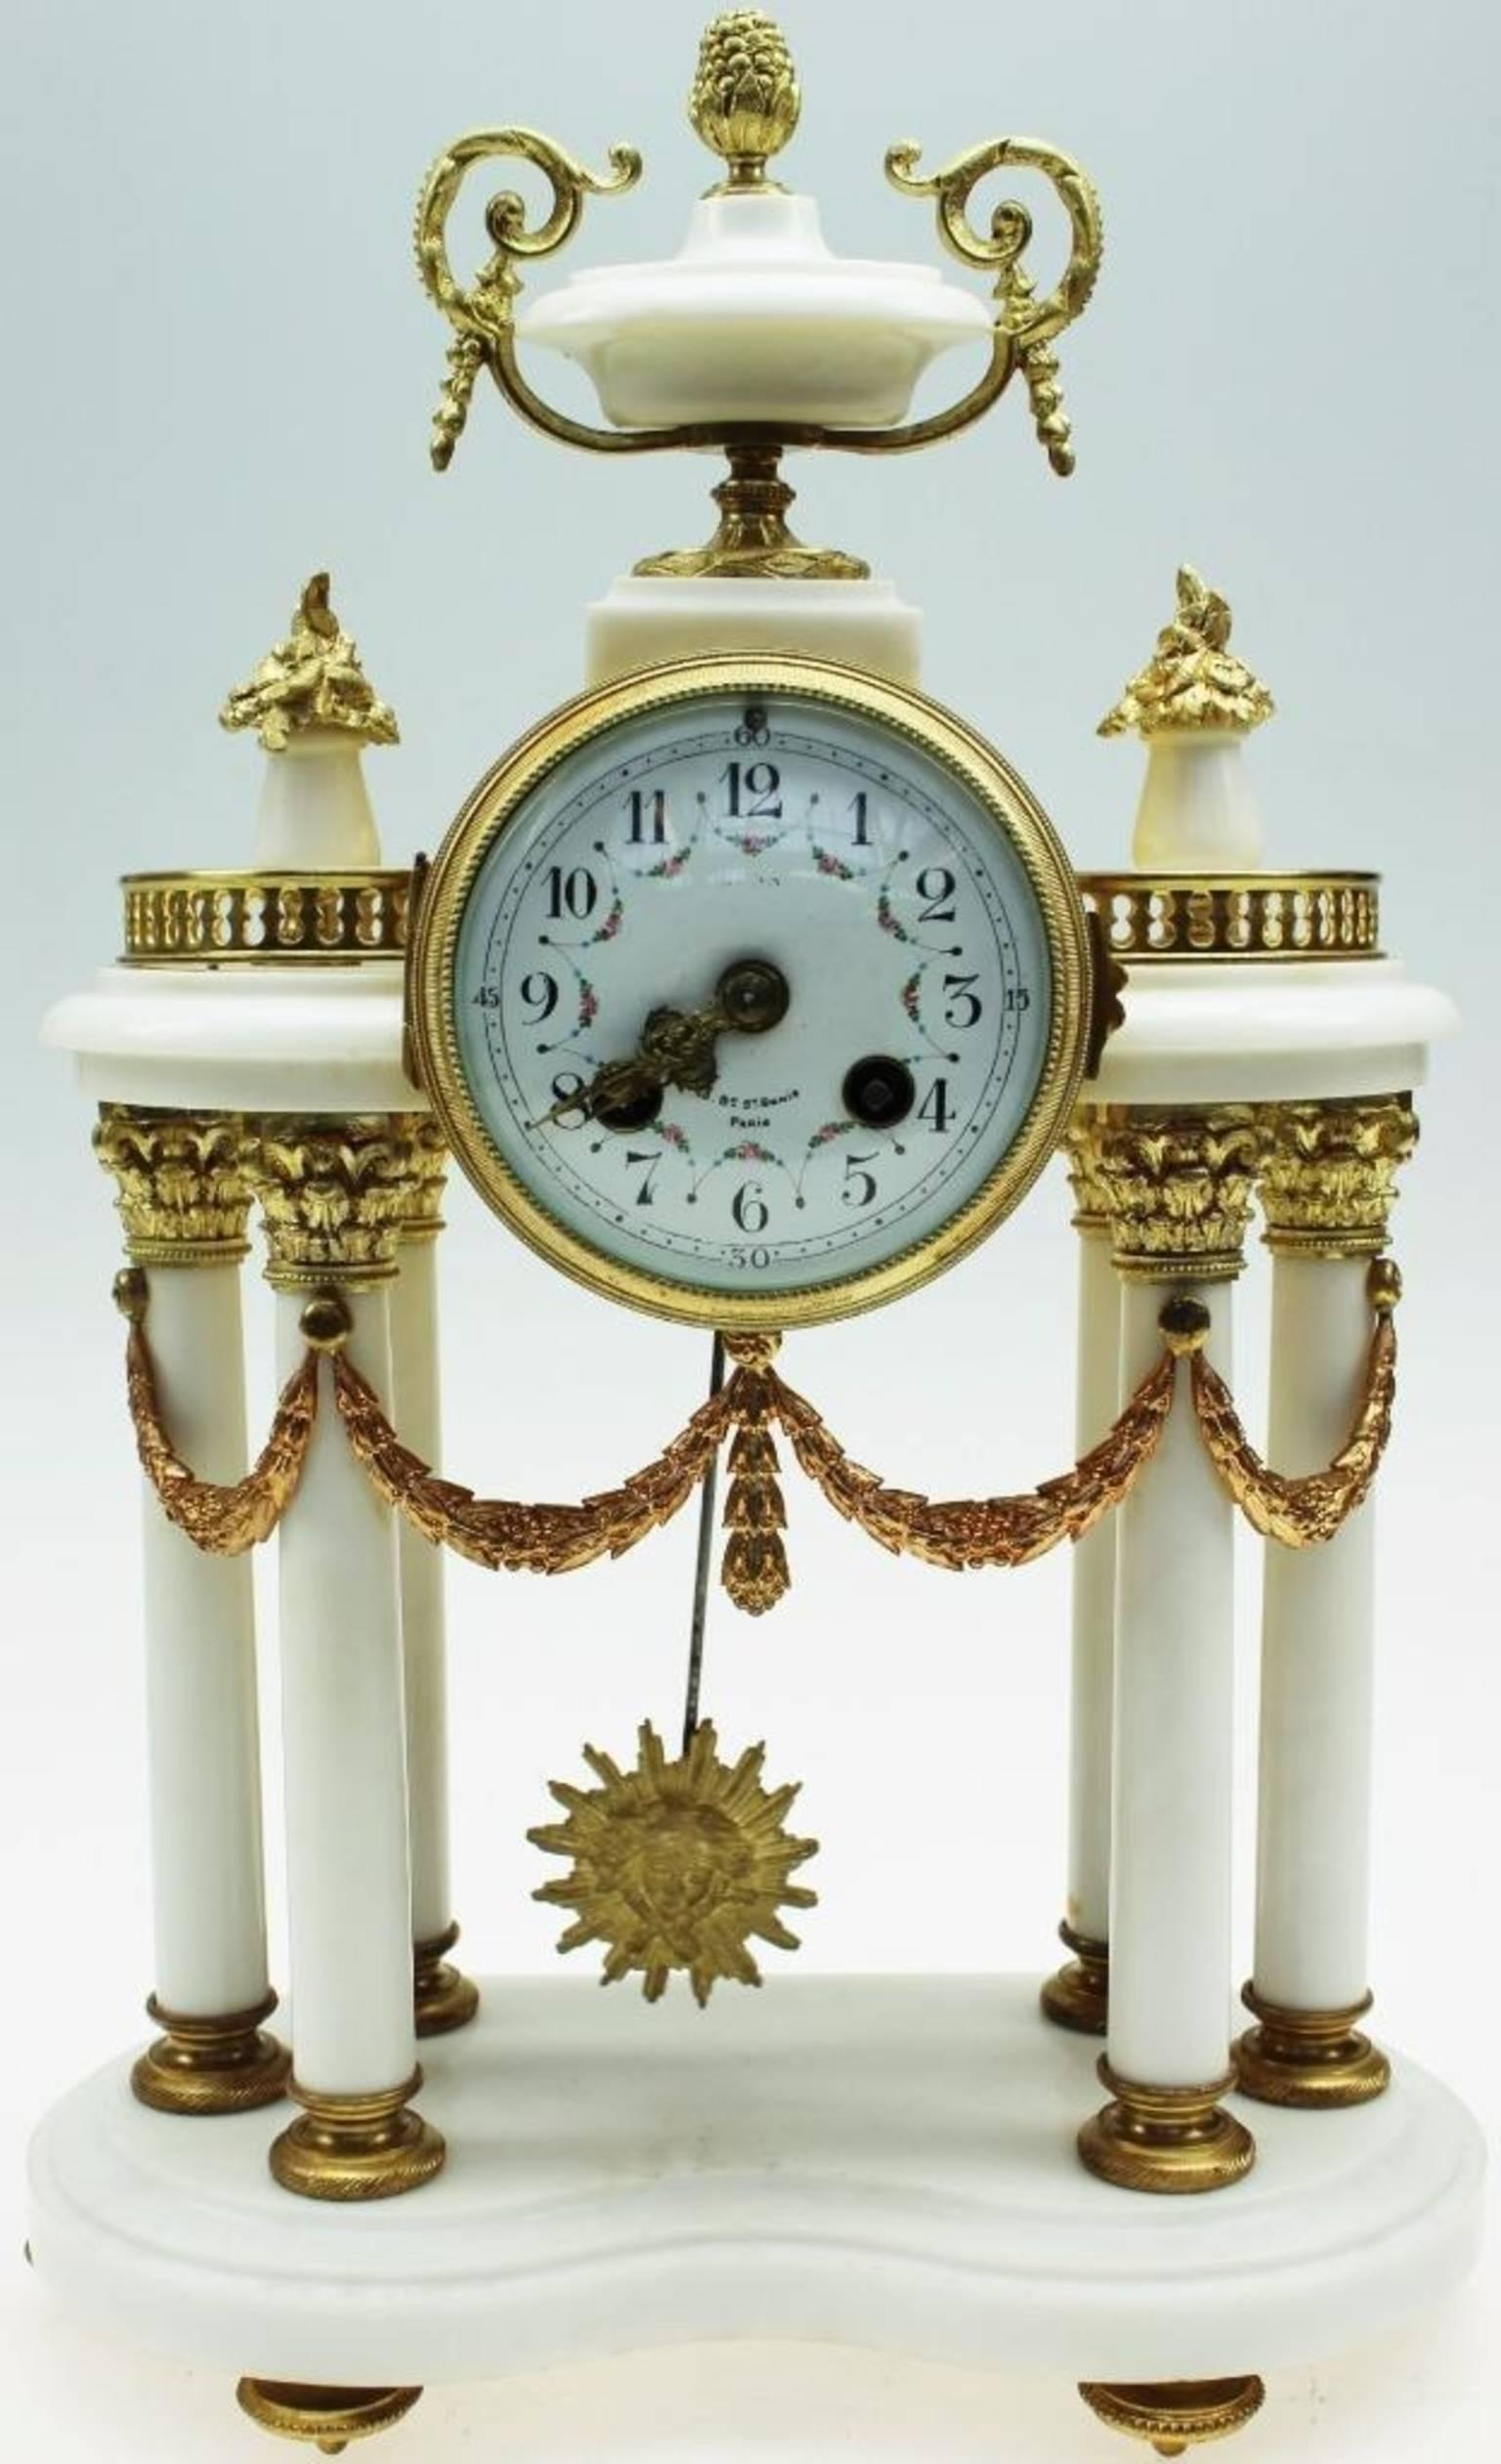 Stunning Napoleon III white marble and ormolu portico clock set including a pair of twin candelabra. The clock is in excellent working condition it has an 8 day French bell striking movement with an anchor escapement with a sunburst pendulum.
The